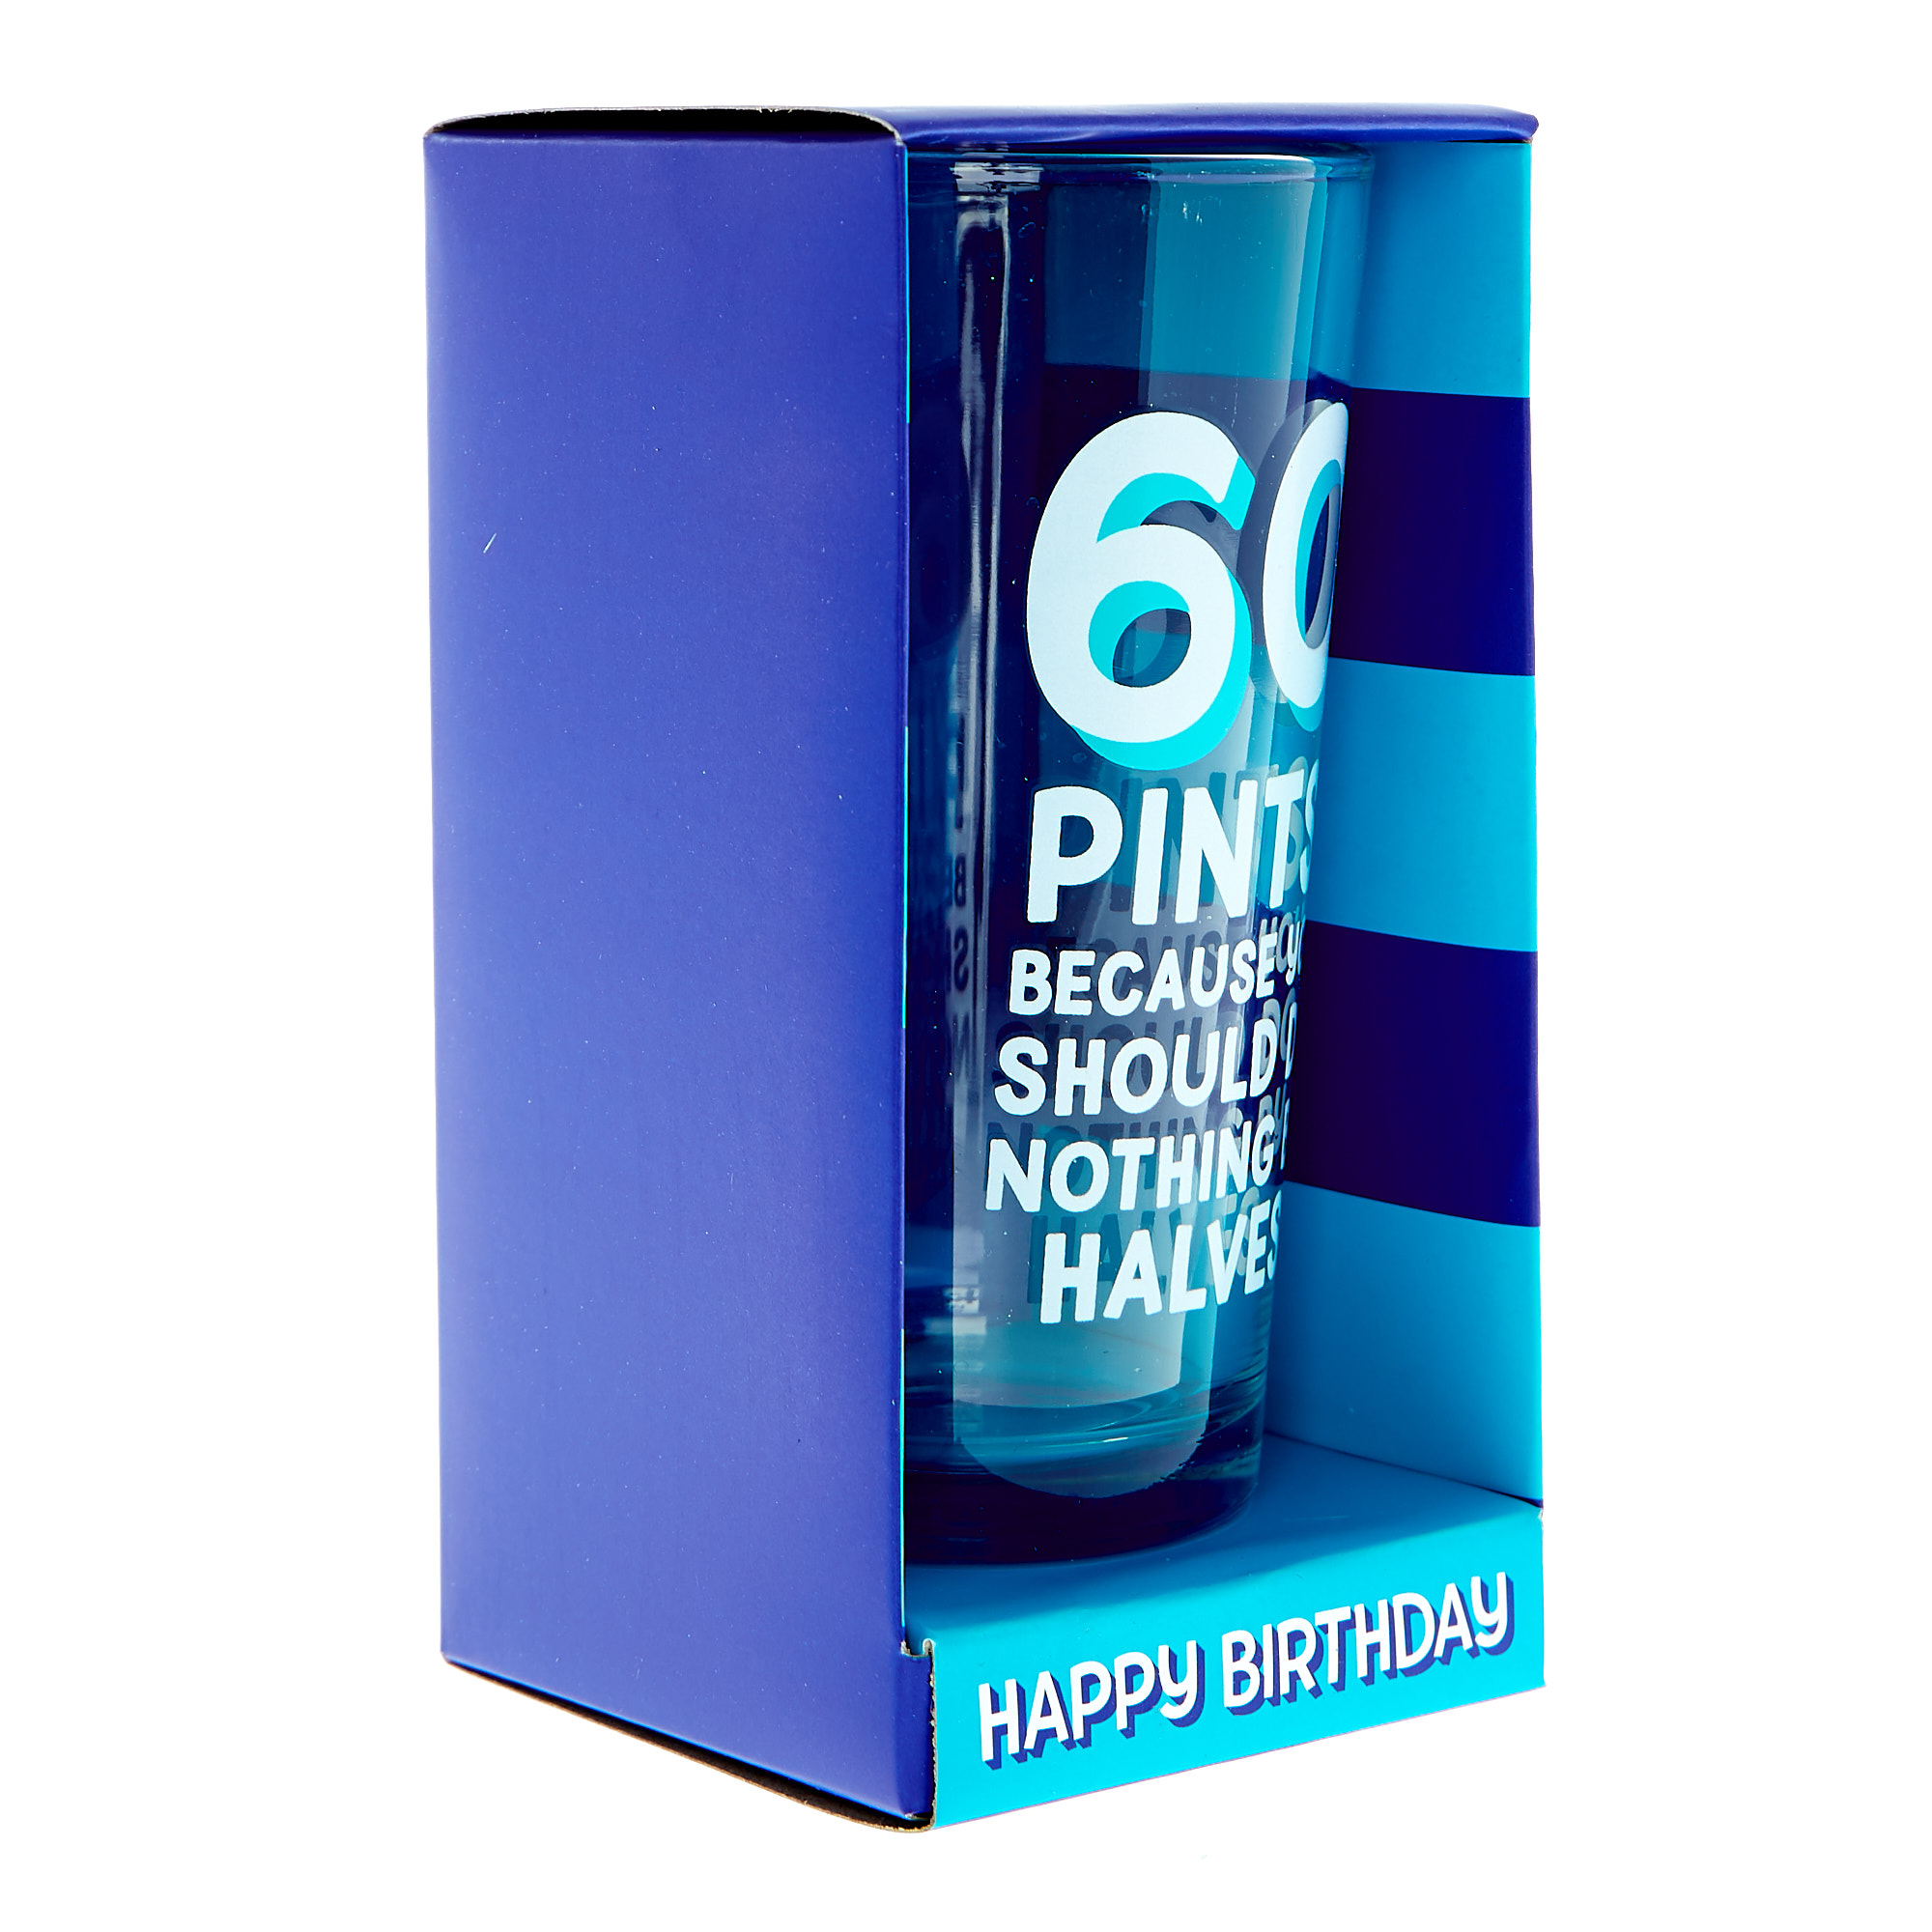 60th Birthday Pint Glass - Nothing By Halves 